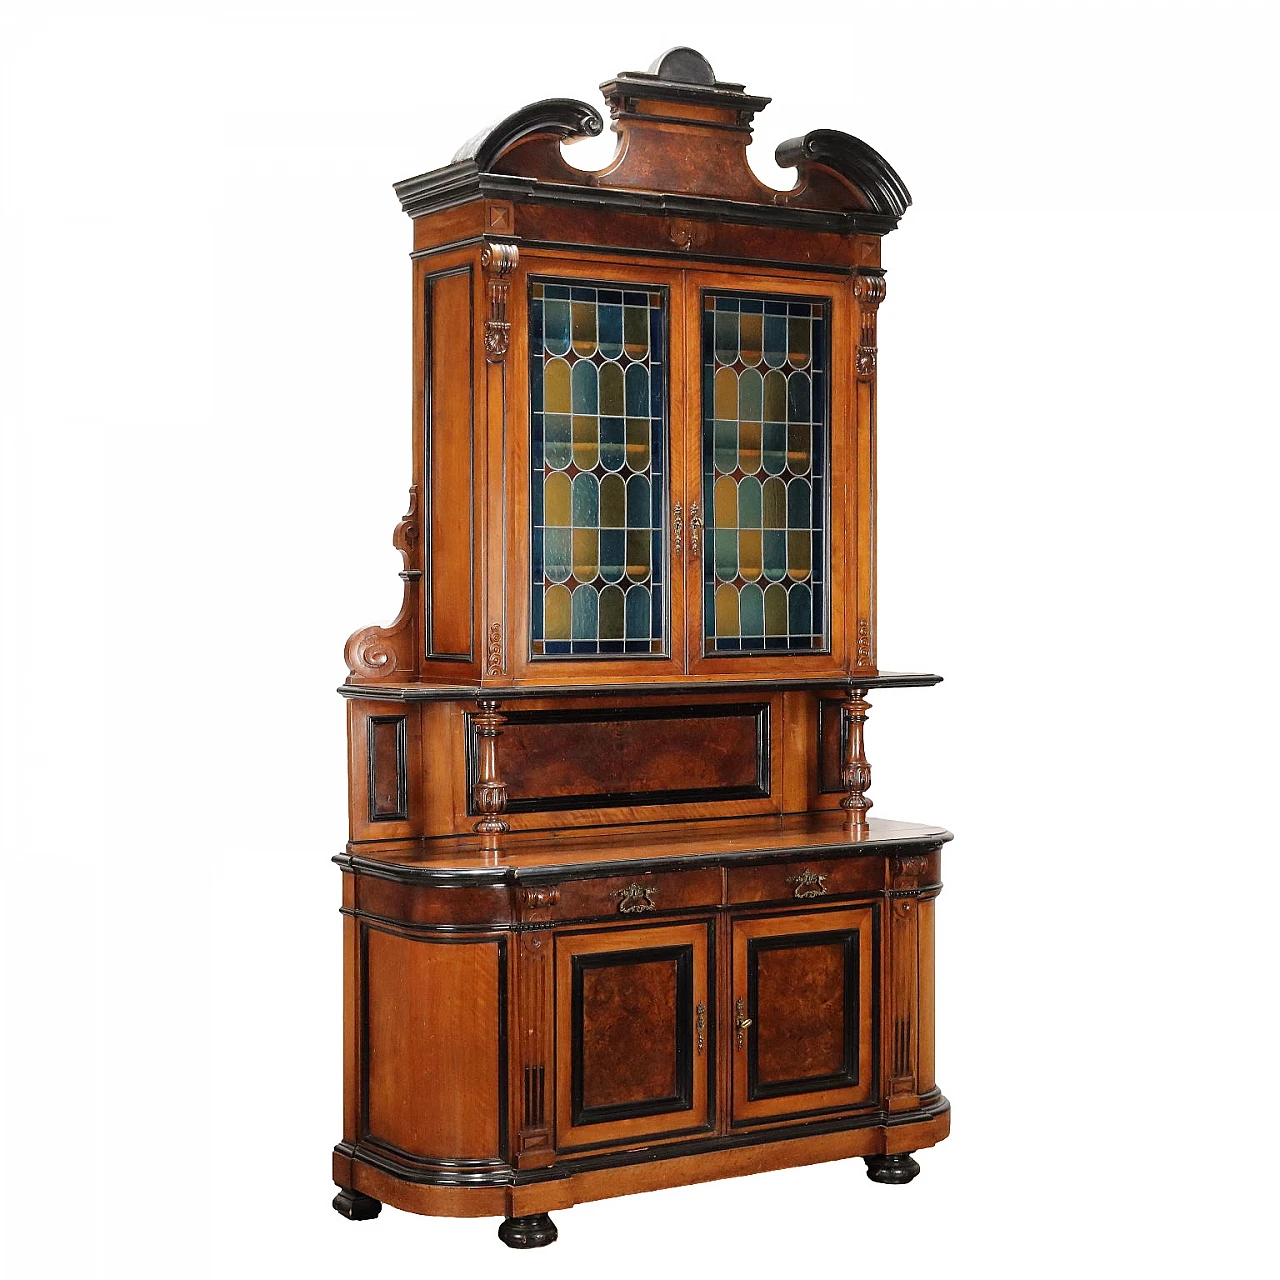 Walnut cabinet with leaded glass doors and turnet feet, 19th century 1